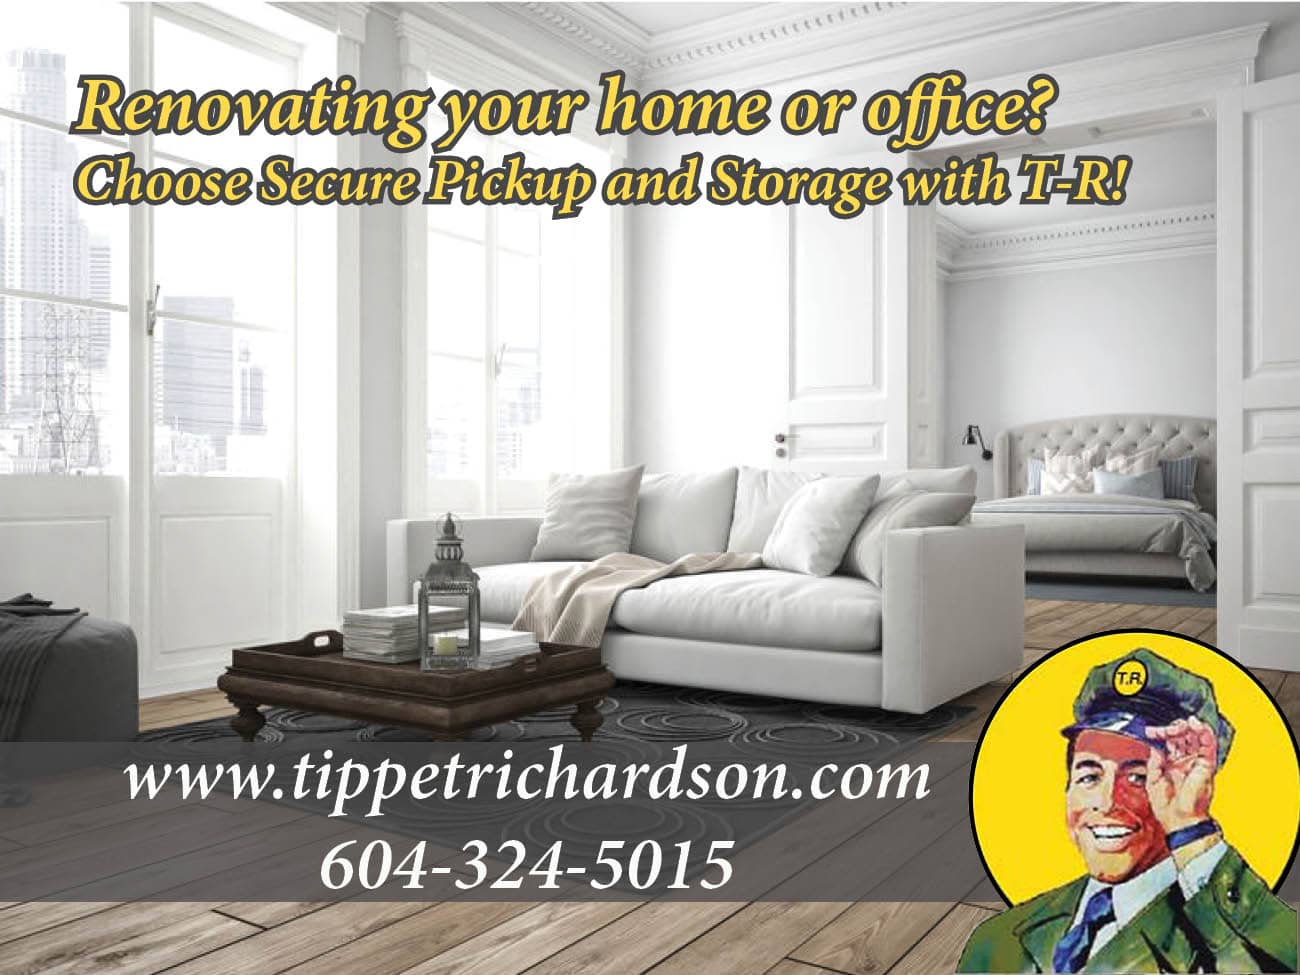 T.R. services offer pick up & storage for your sofa, bed, or table